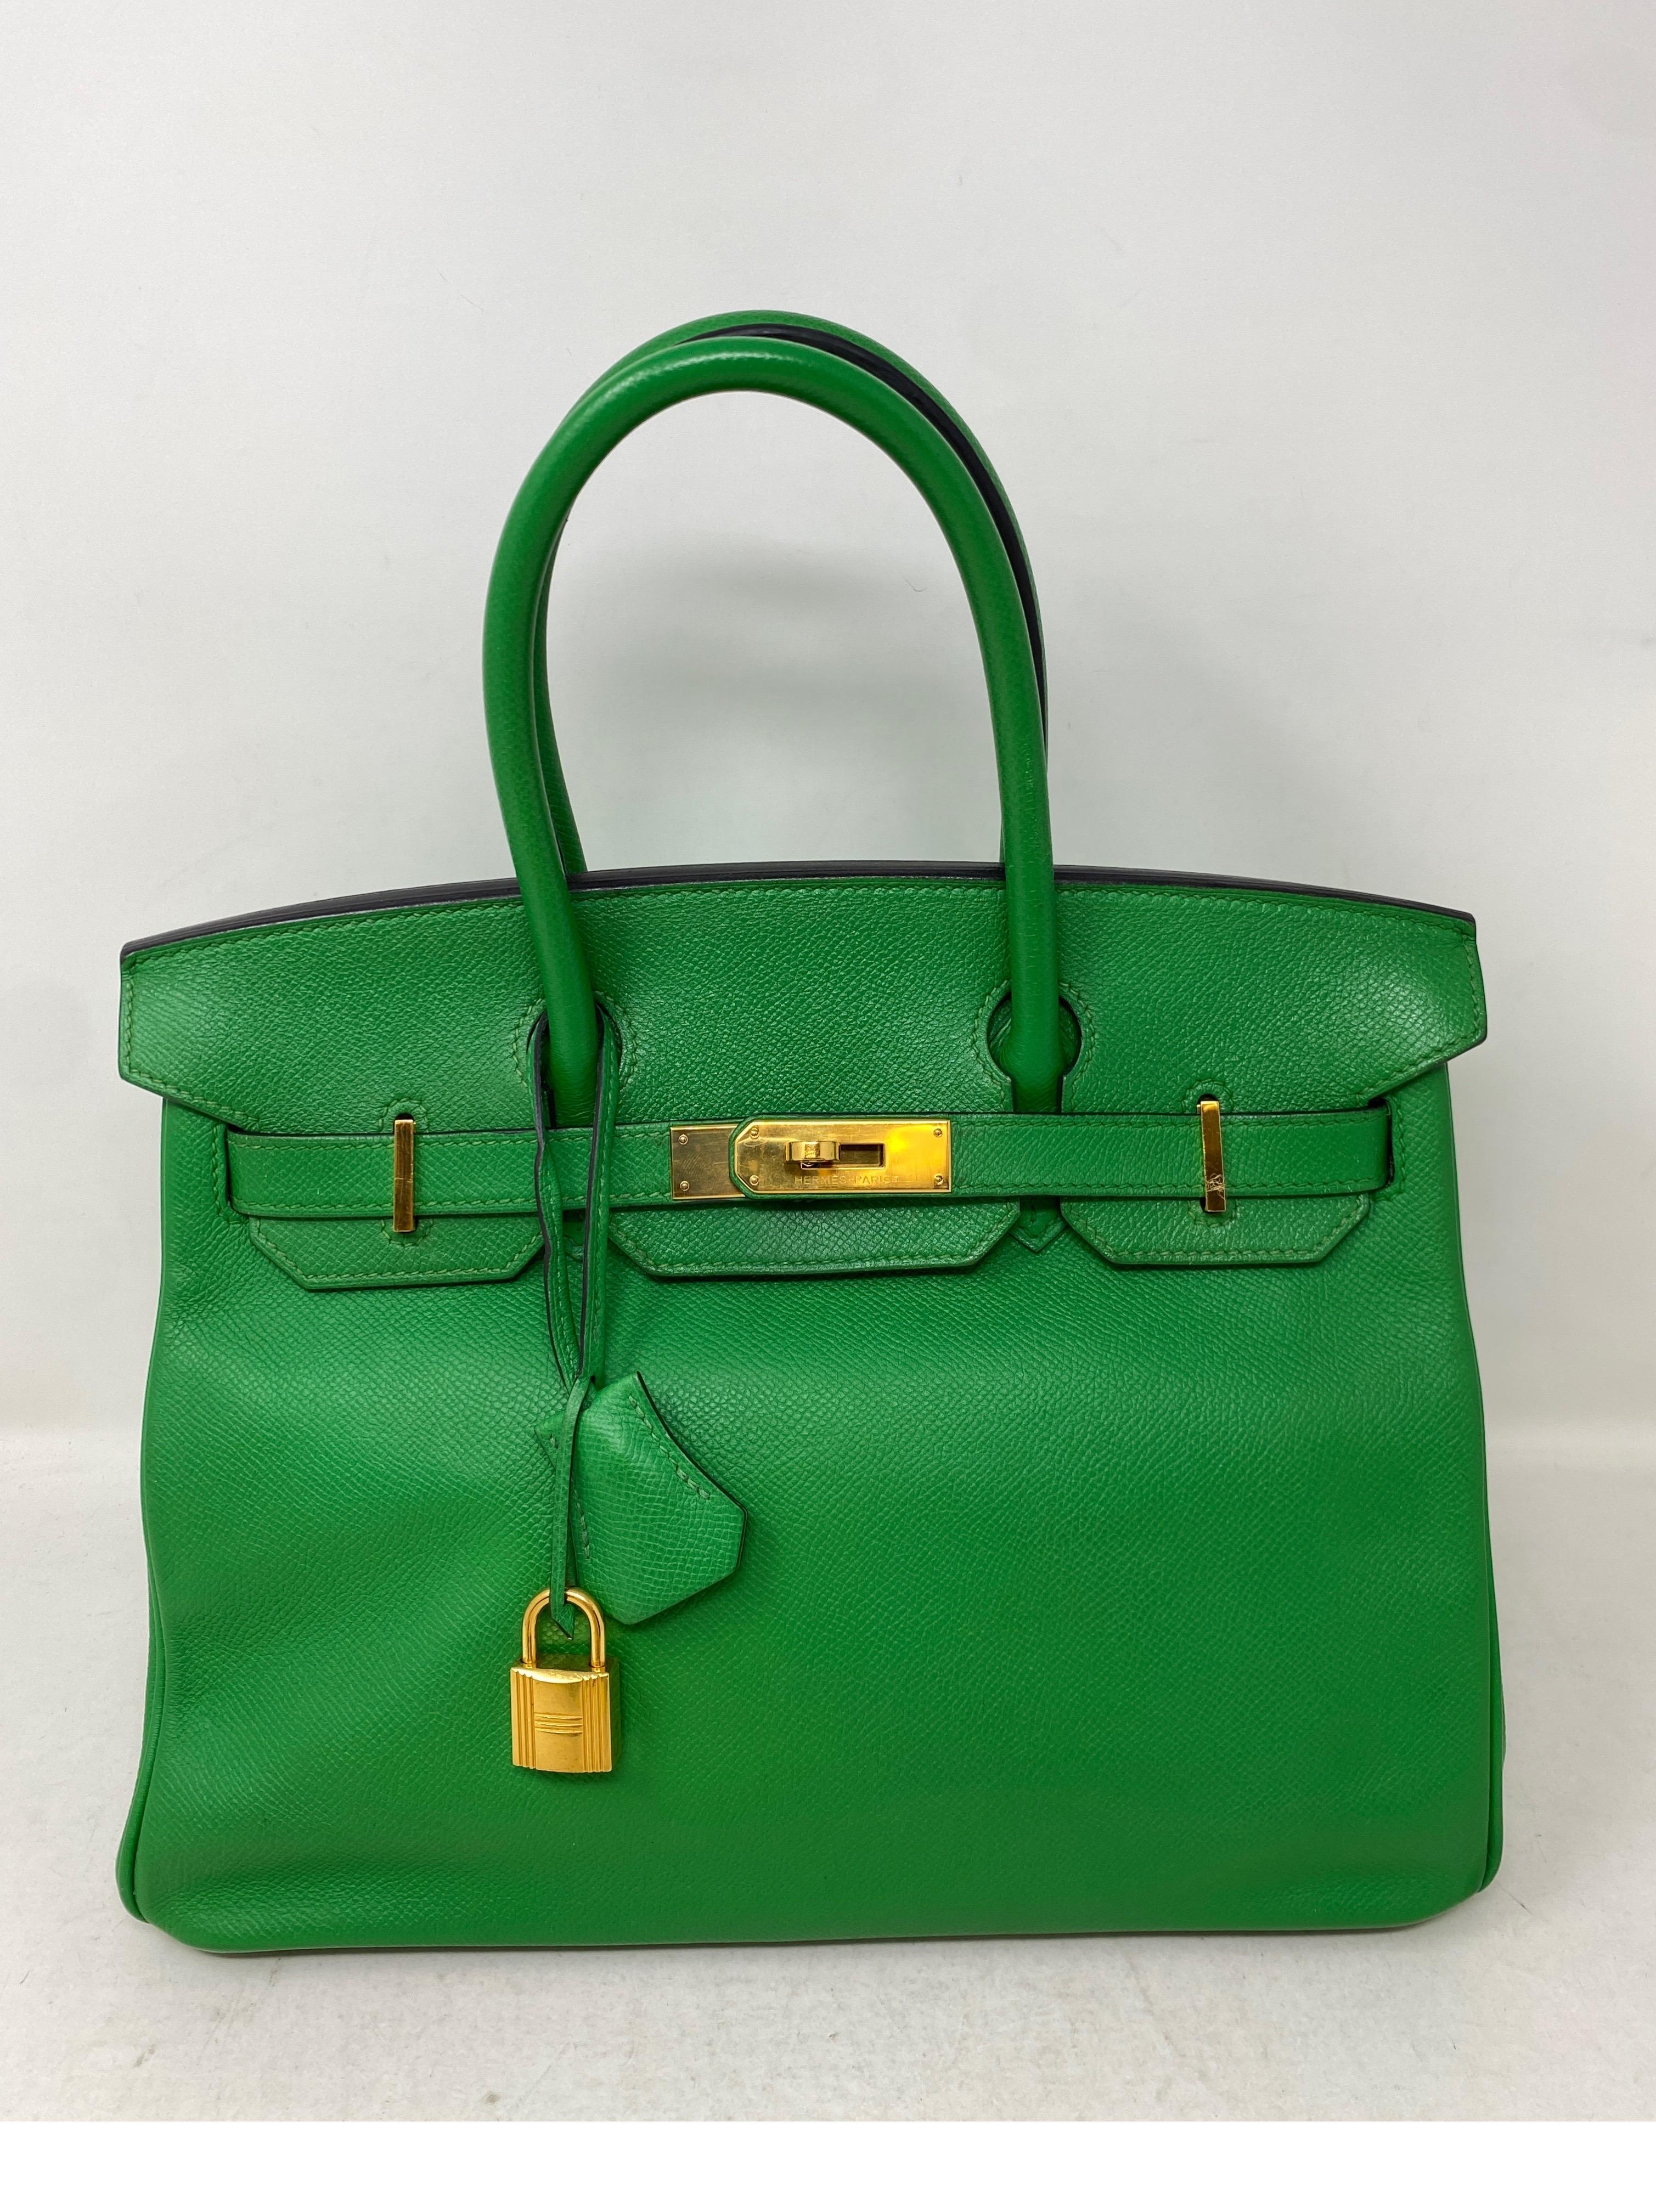 Hermes Bamboo Birkin 30 Bag. Rare bamboo green color. Gold hardware. Epsom leather. Good condition. Interior clean. Most wanted green color and hardware. Includes clochette, lock, keys, and dust bag. Guaranteed authentic. 